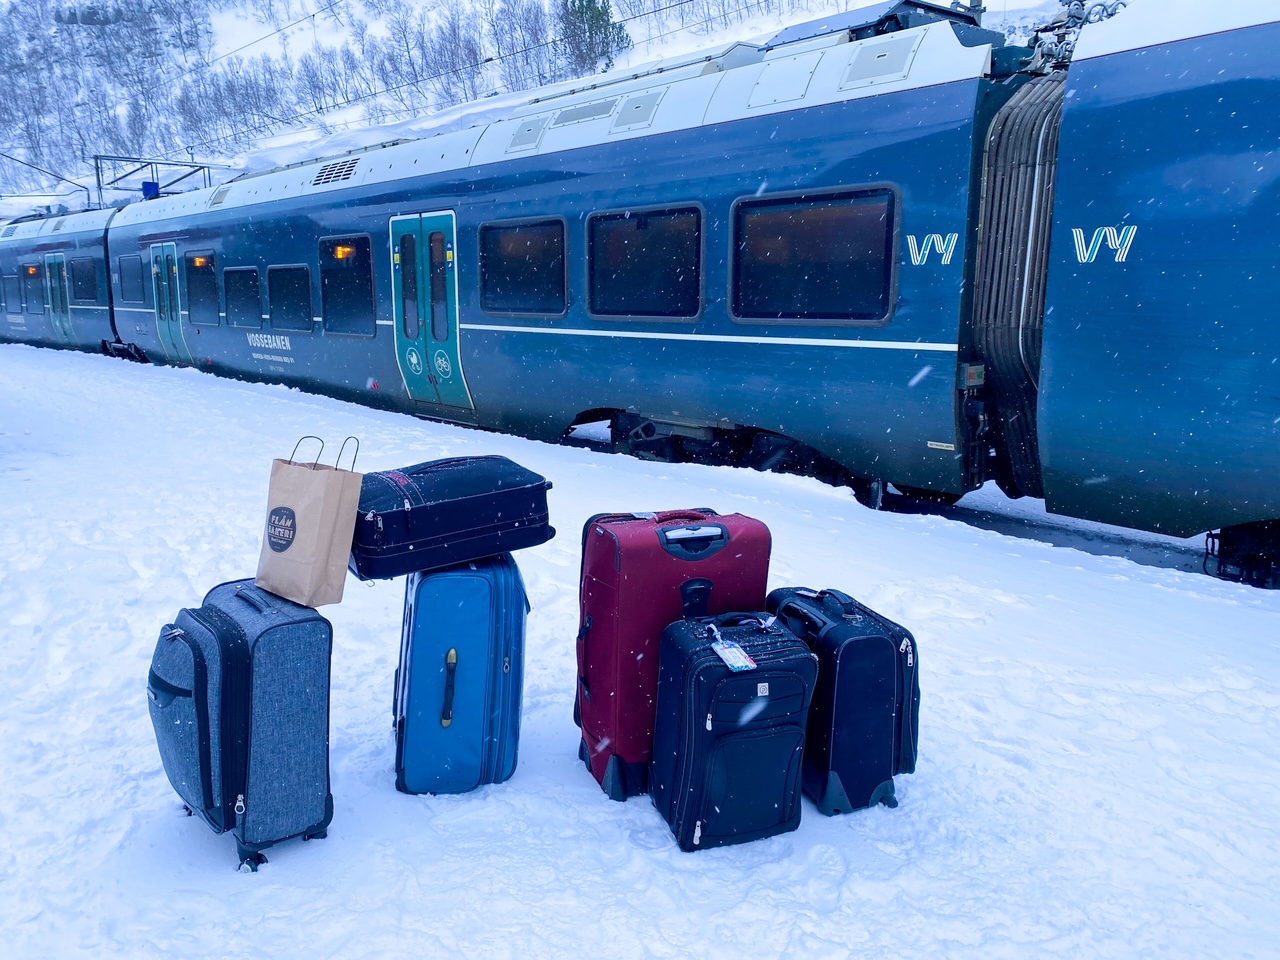 all of our luggage in the snow in Myrdal, Norway waiting to board the train back to Oslo, Norway